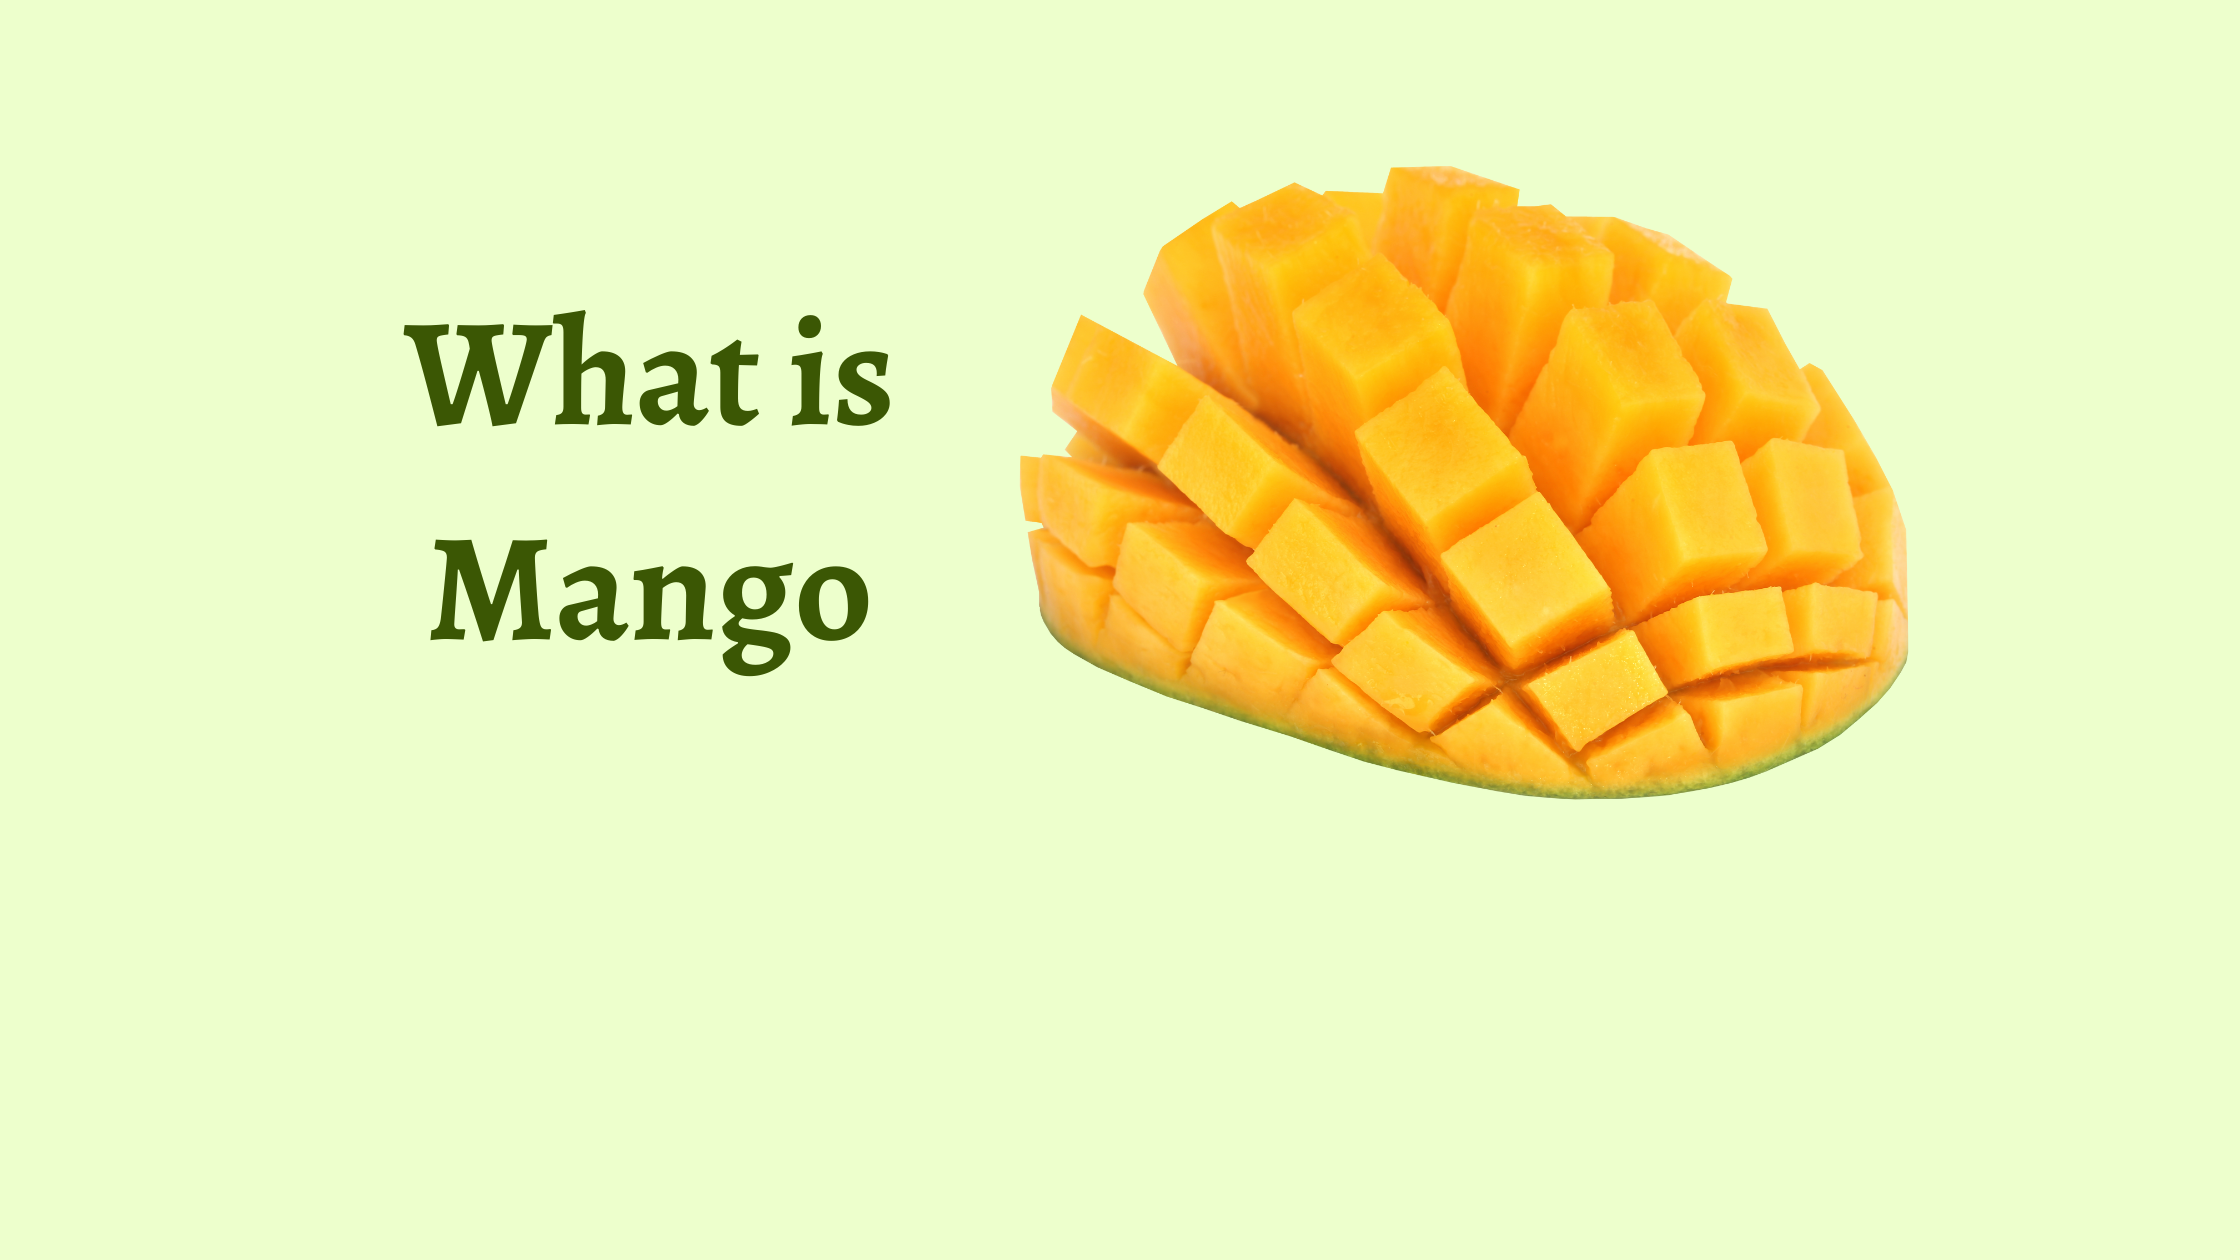 What is Mango